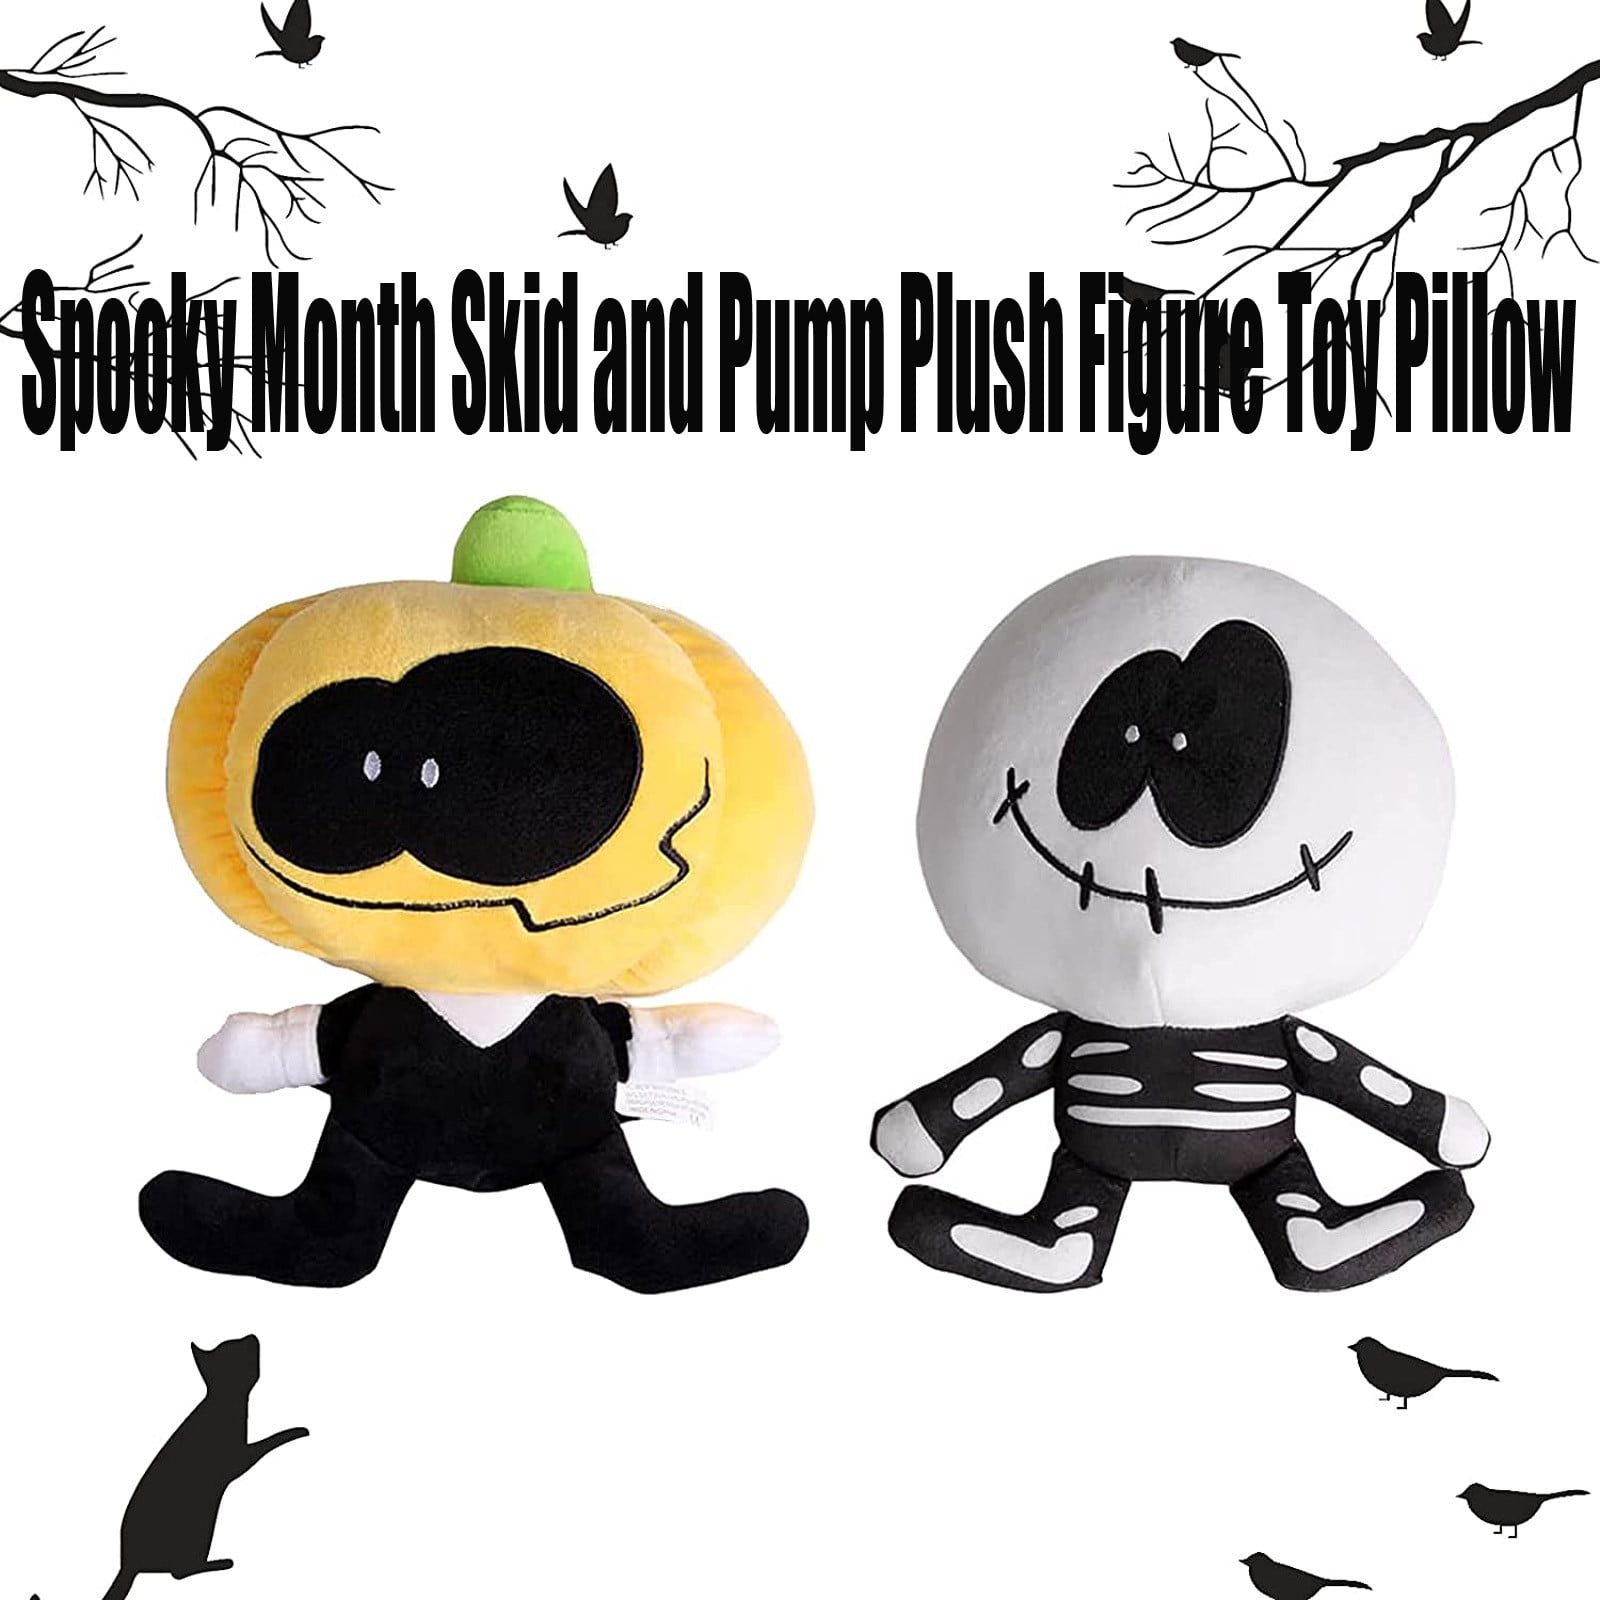 Bymon 9.84inch Spooky Month Skid and Pump Plush,Upgrade Soft Stuffed Skid & Pump Plush Gift for Fans Skid+Pump 